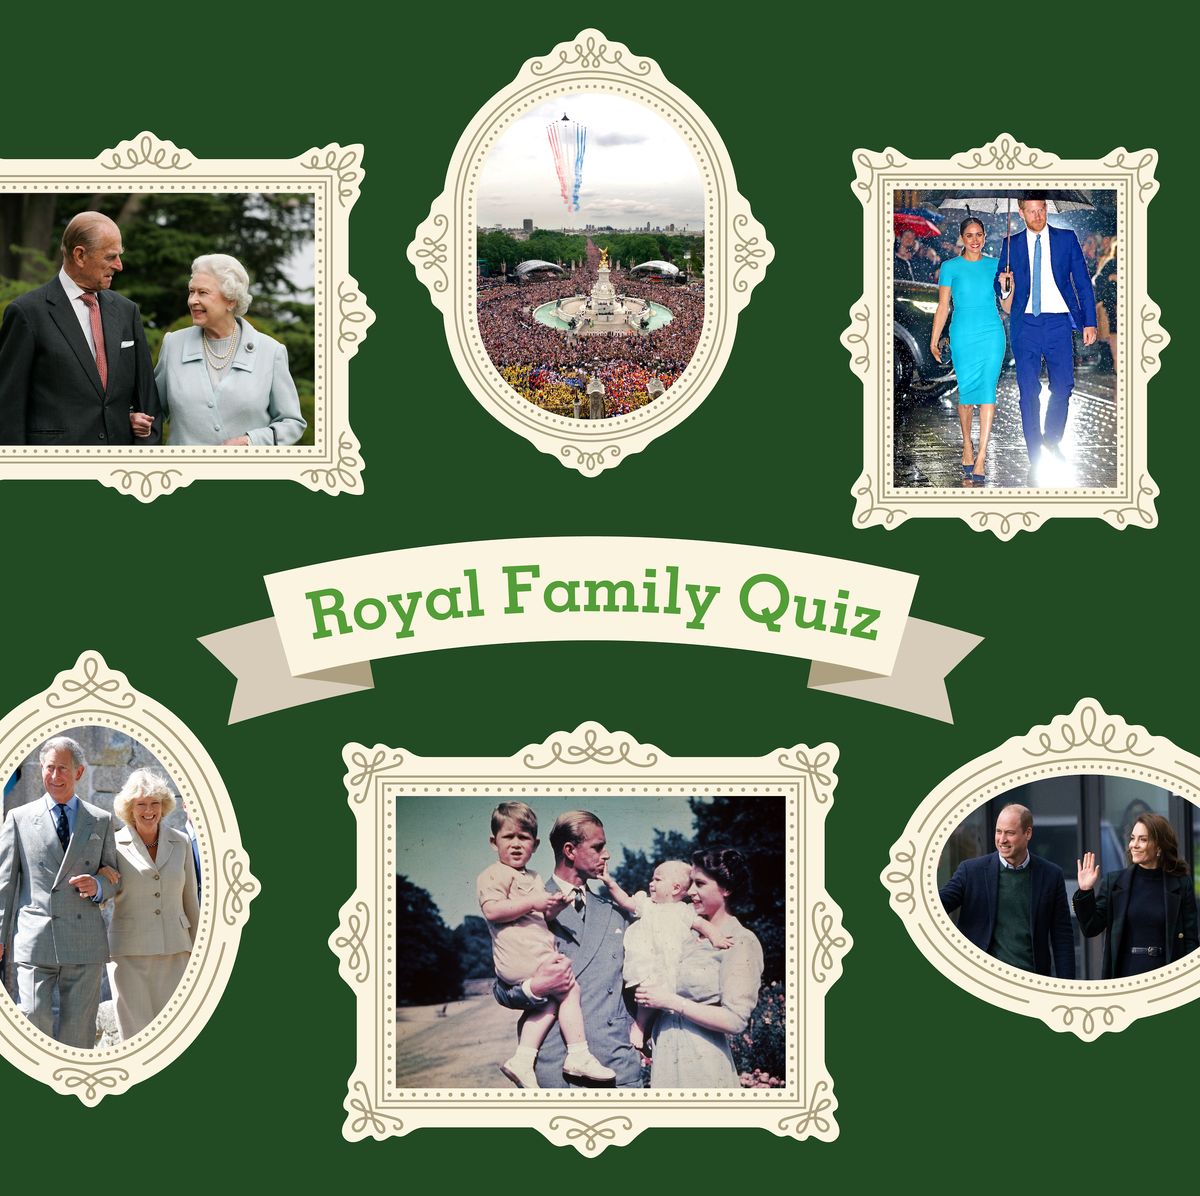 47 Royal Family Quiz Questions and Answers - King's Coronation